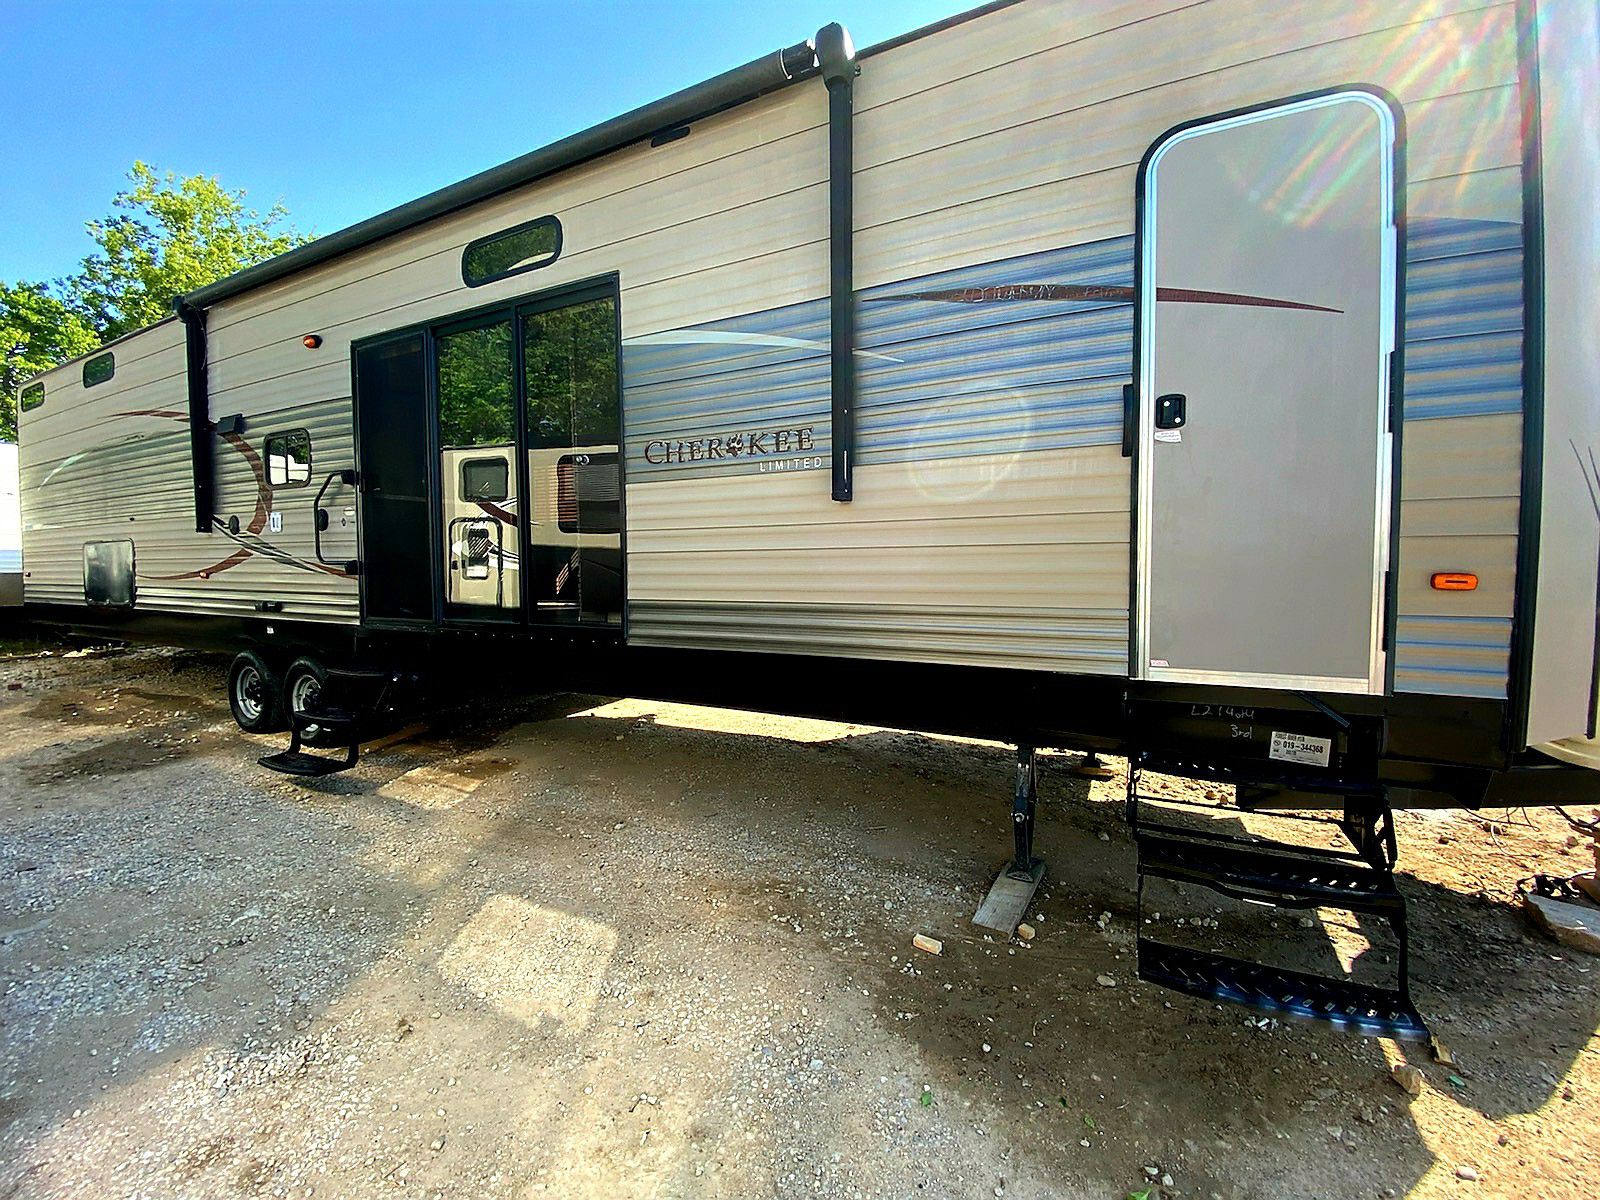 2015 Cherokee Limited 43ft bumper pull travel trailer with 3 slide outs bunkhouse